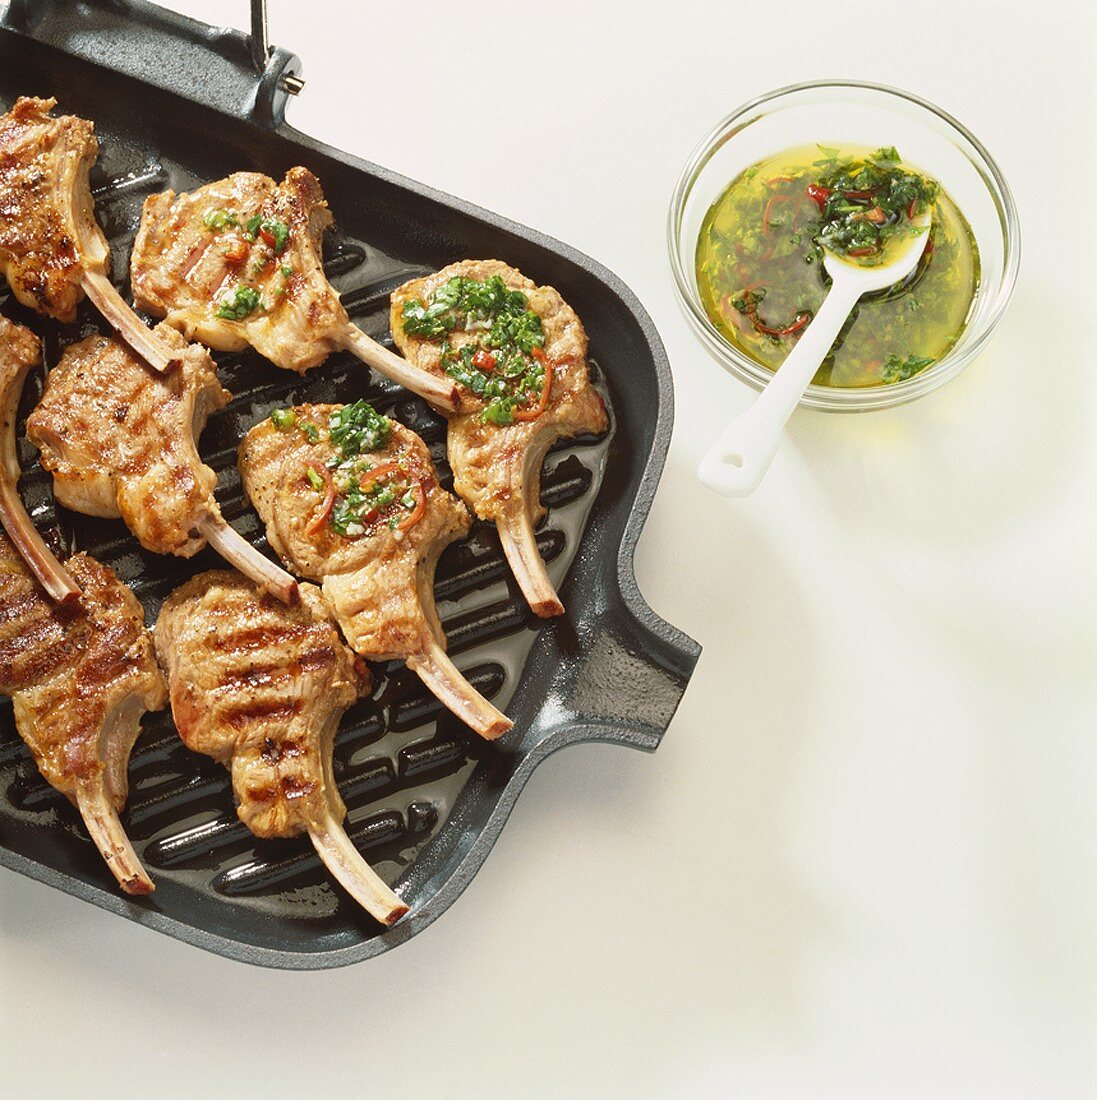 Lamb chops with herb oil on a grill pan